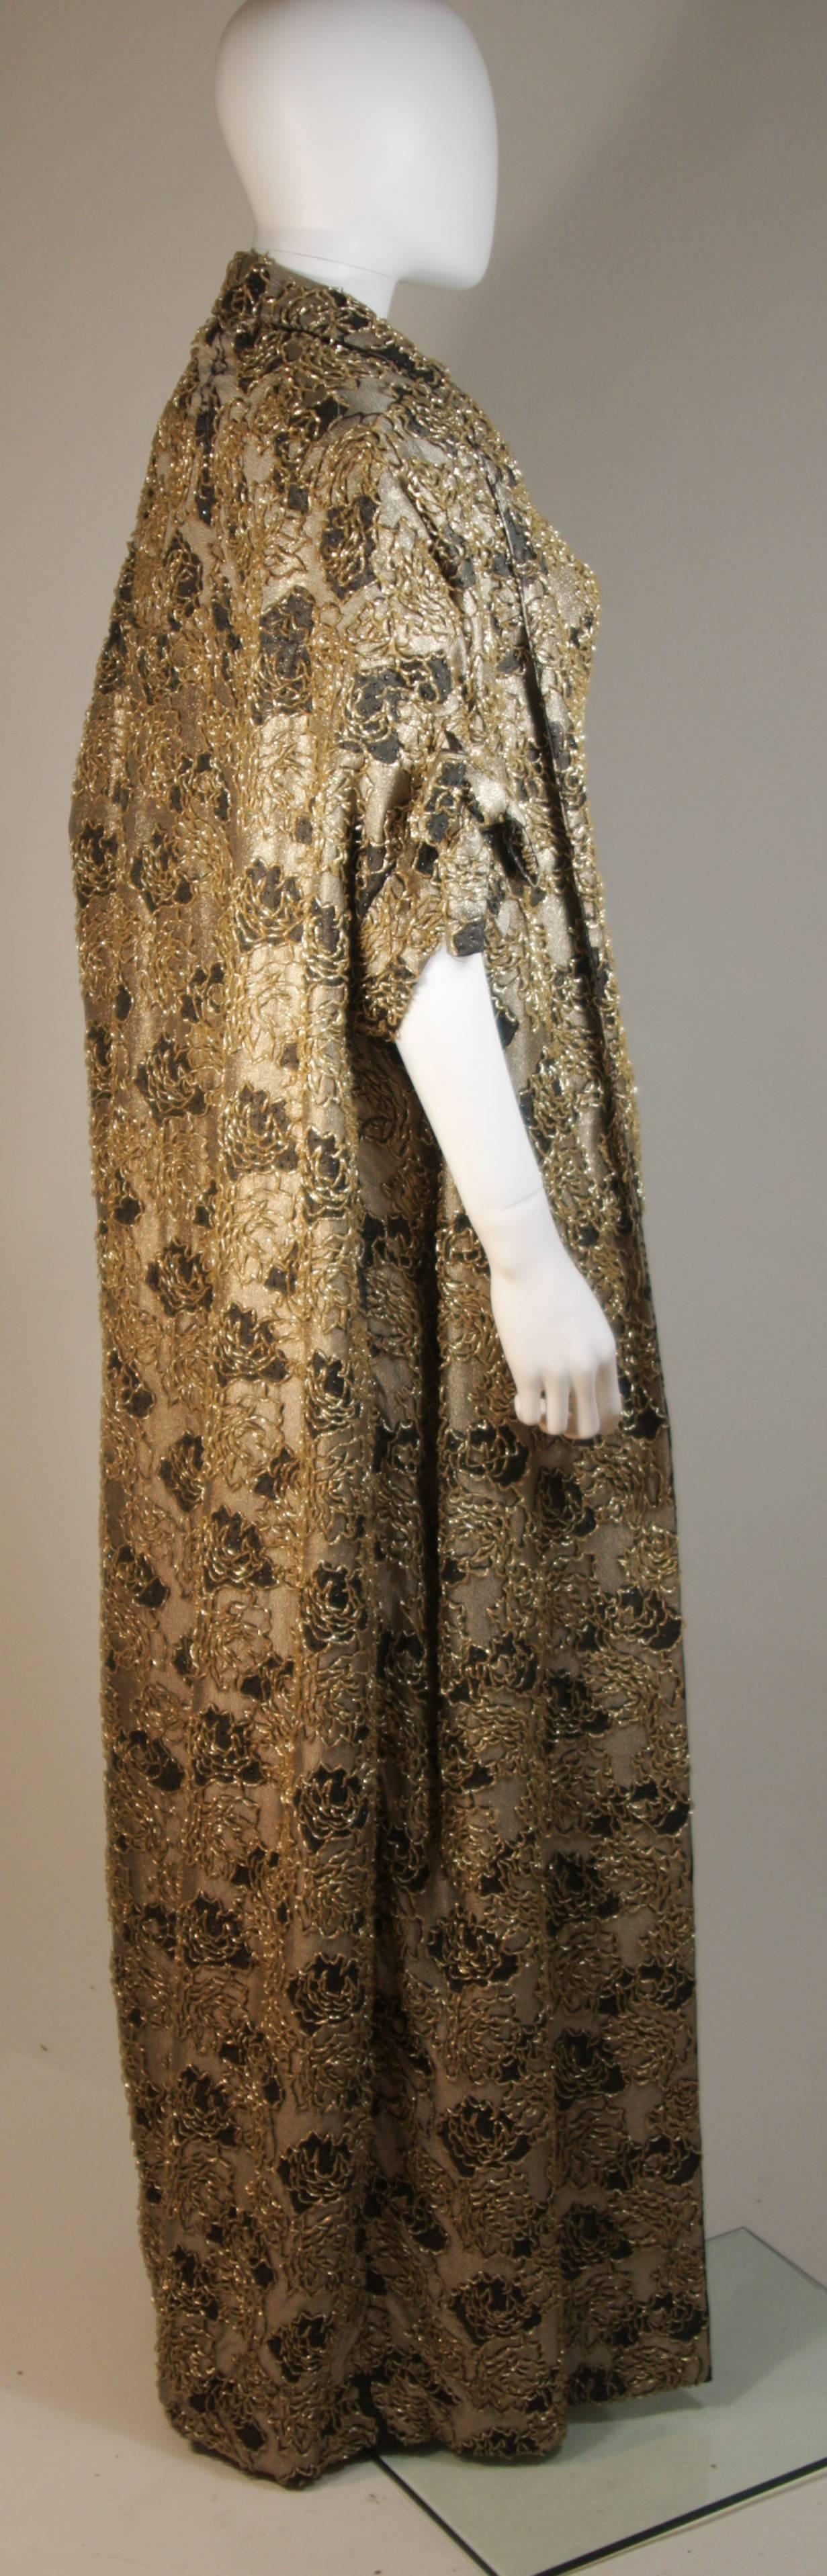 HAUTE COUTURE INT'L Gold and Black Beaded Gown with Opera Coat Size 6 In Excellent Condition For Sale In Los Angeles, CA